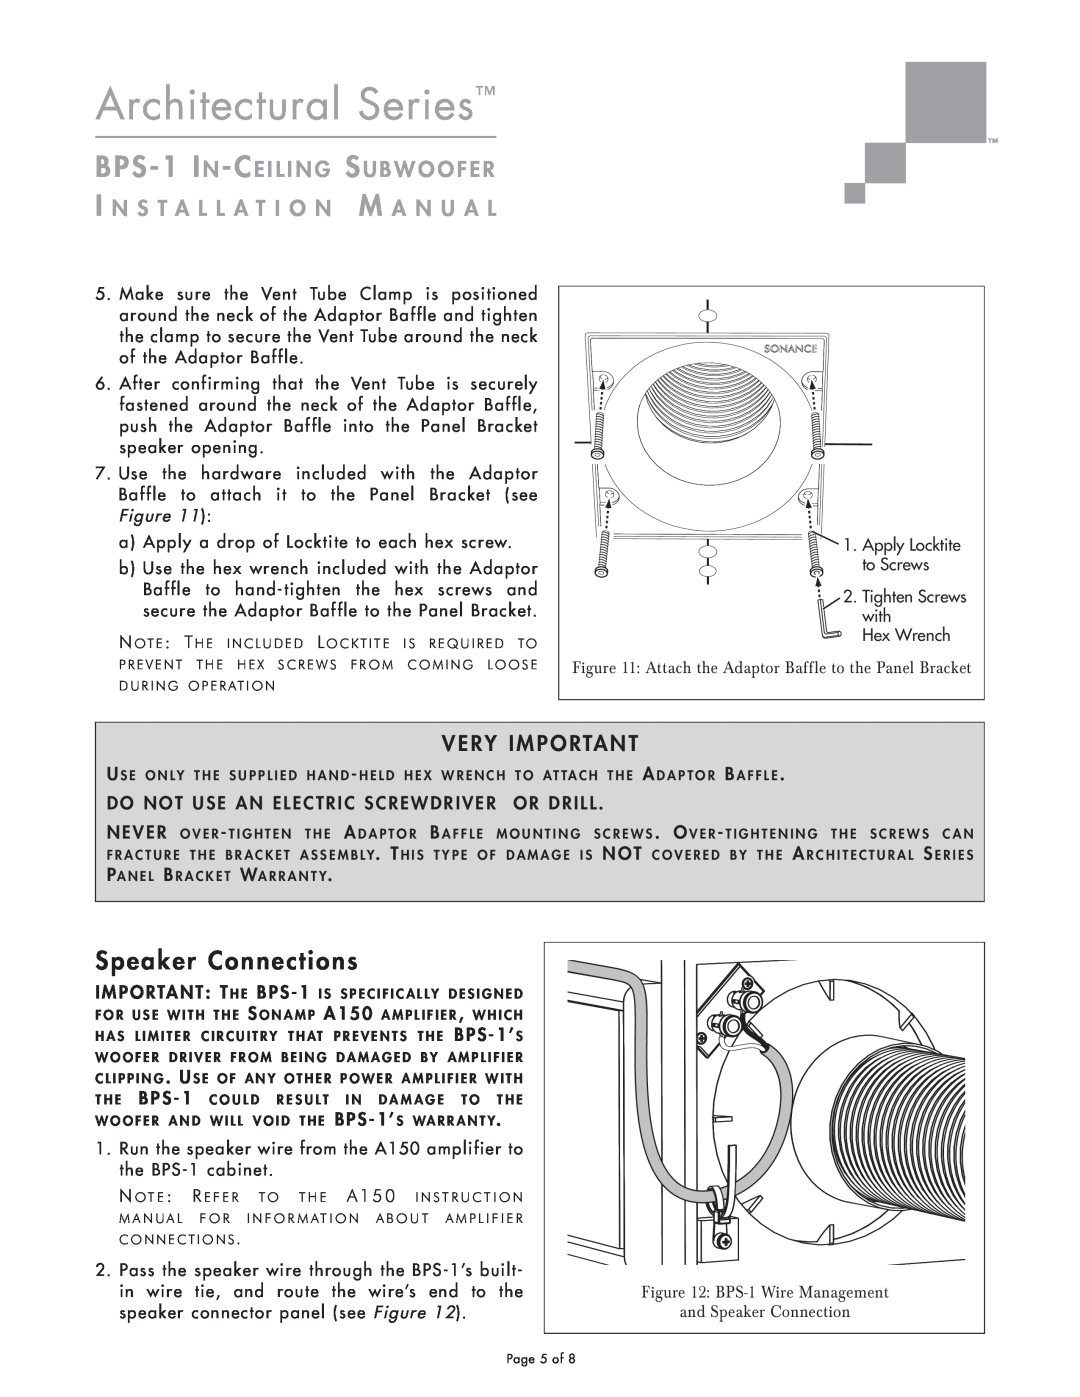 Sonance BPS-1 installation manual Speaker Connections, Architectural Series, Very Important 